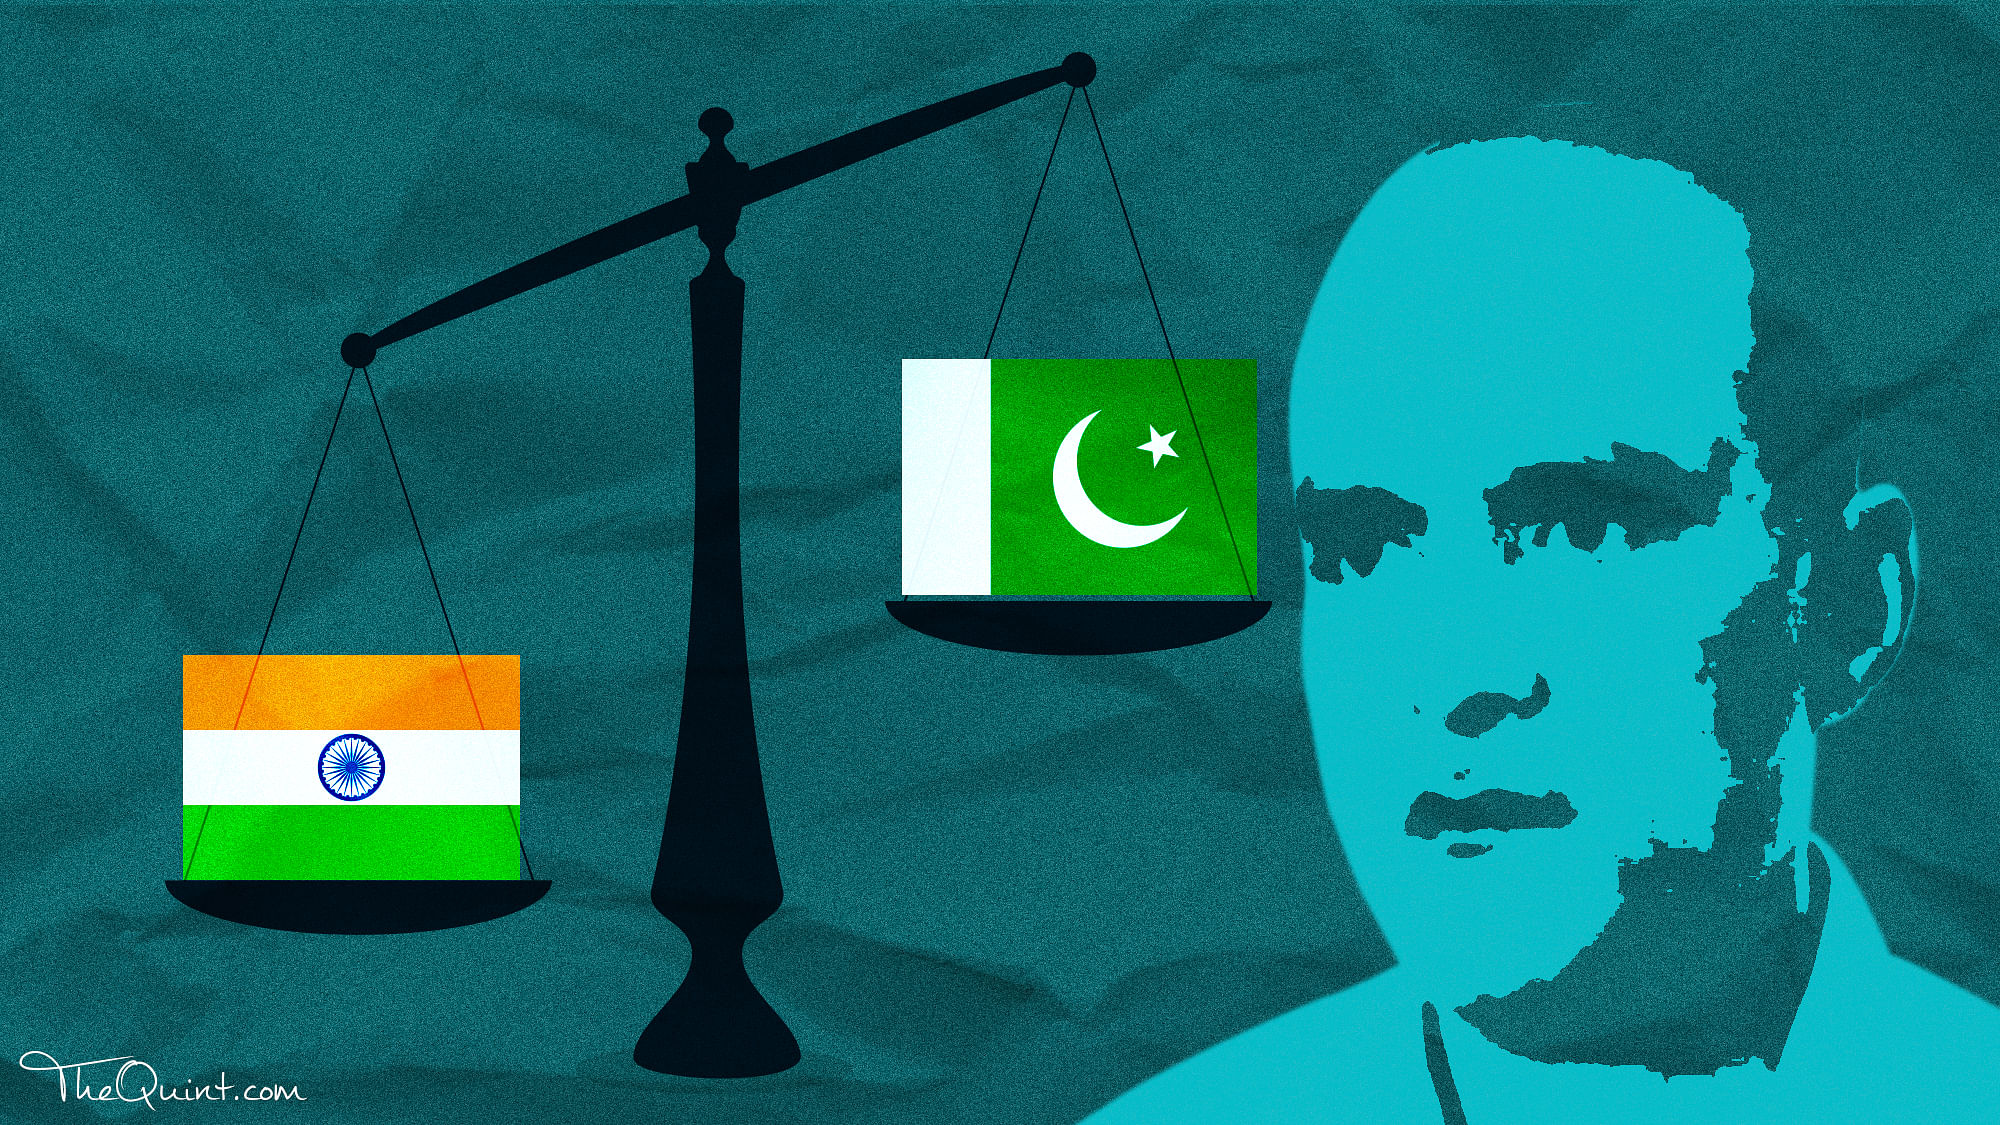 Jadhav, 47, was sentenced to death by a Pakistani military court on spying charges in April 2017.